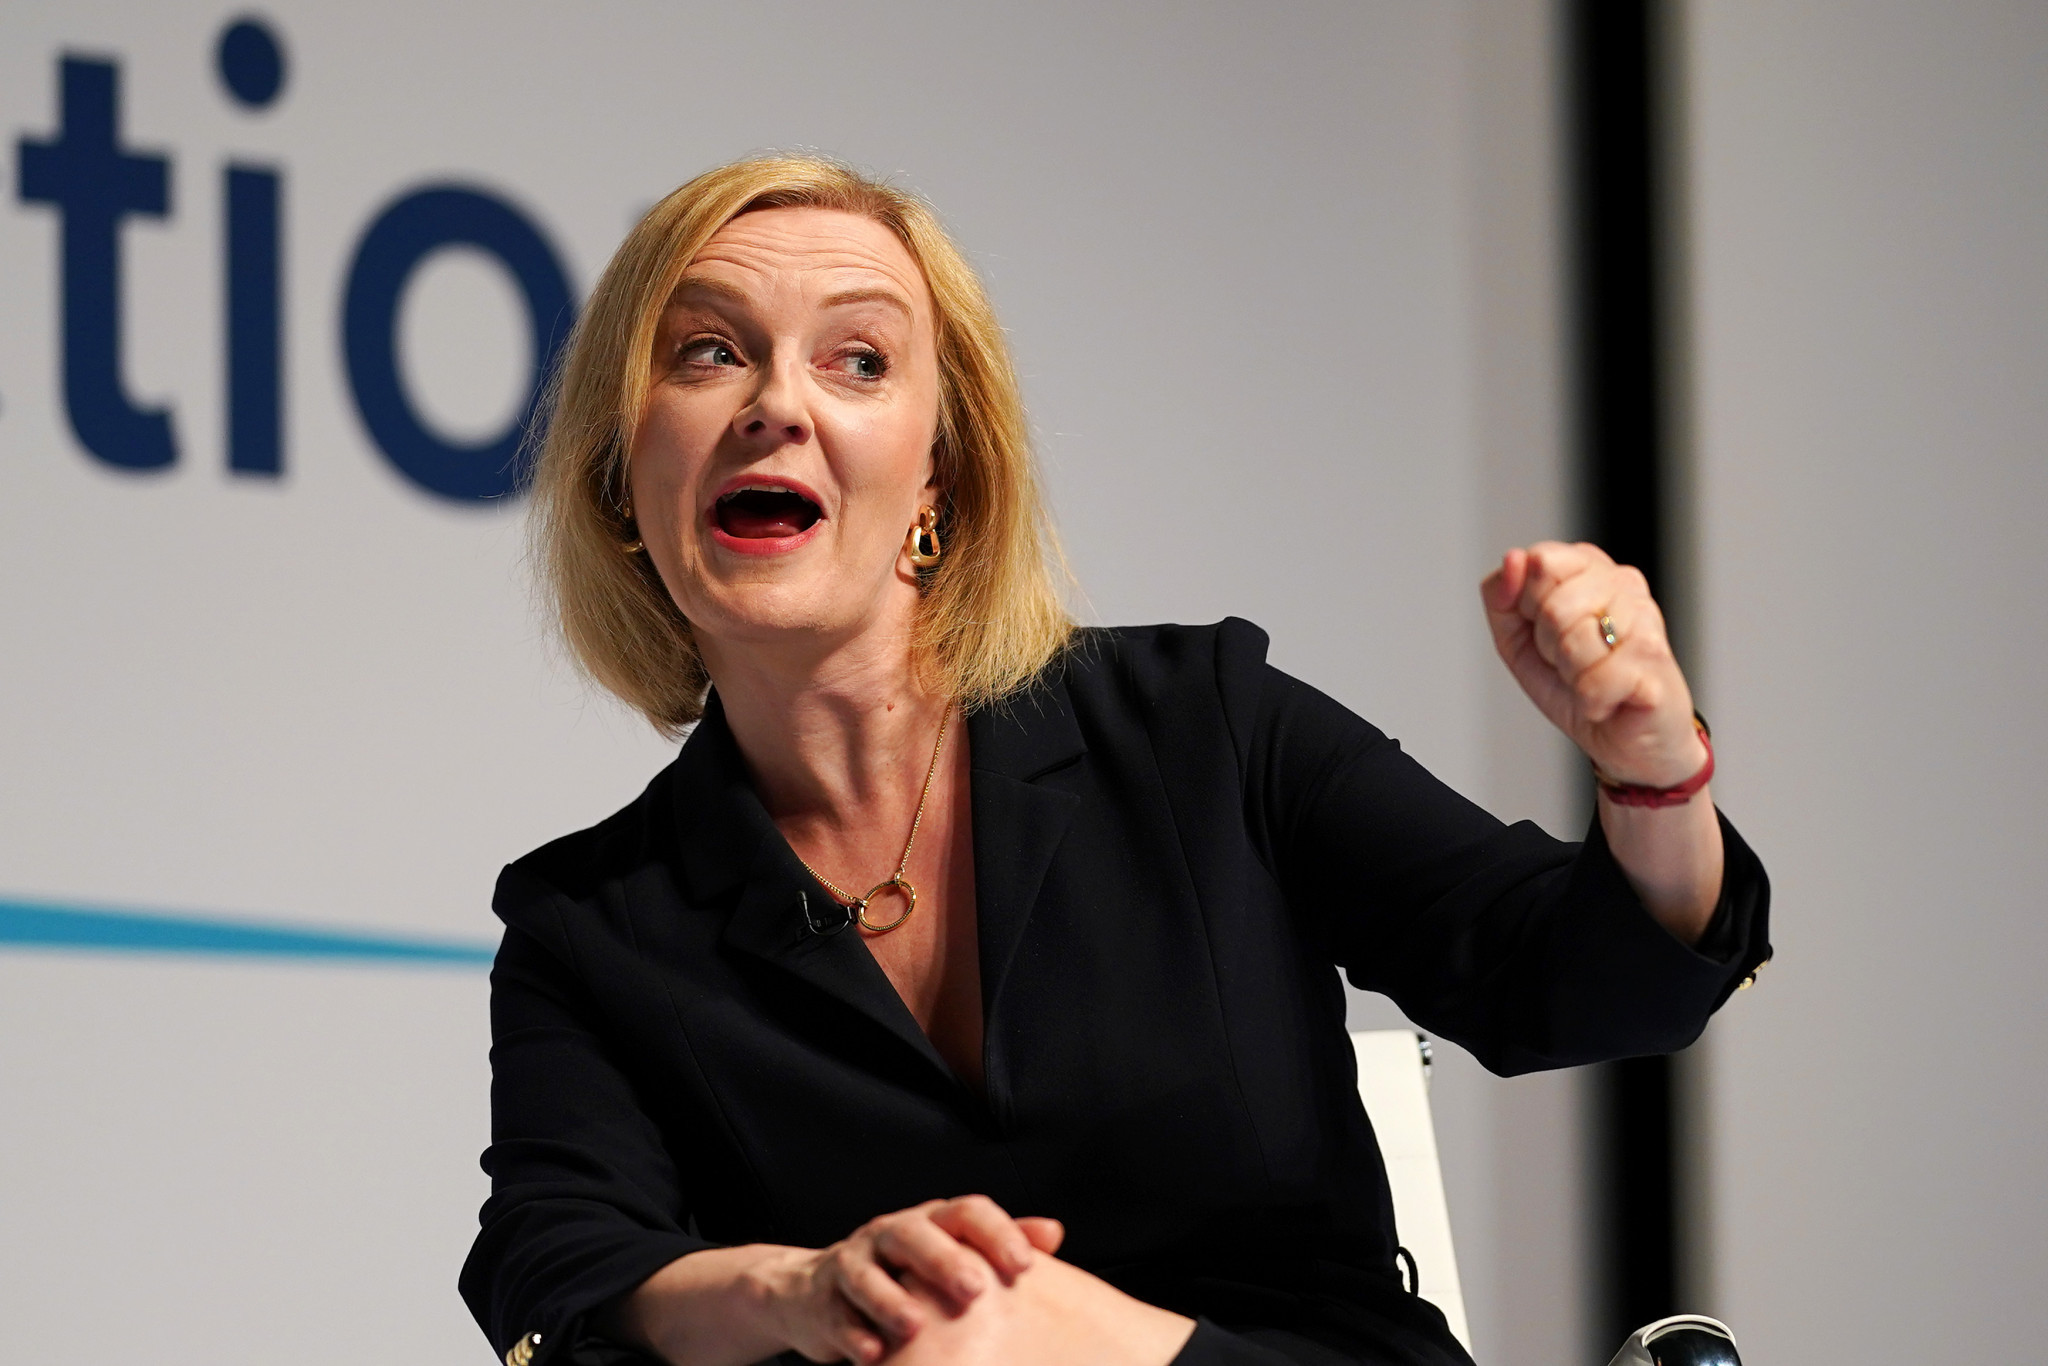 Liz Truss is the front runner to become the next Prime Minister of Britain ©Getty Images